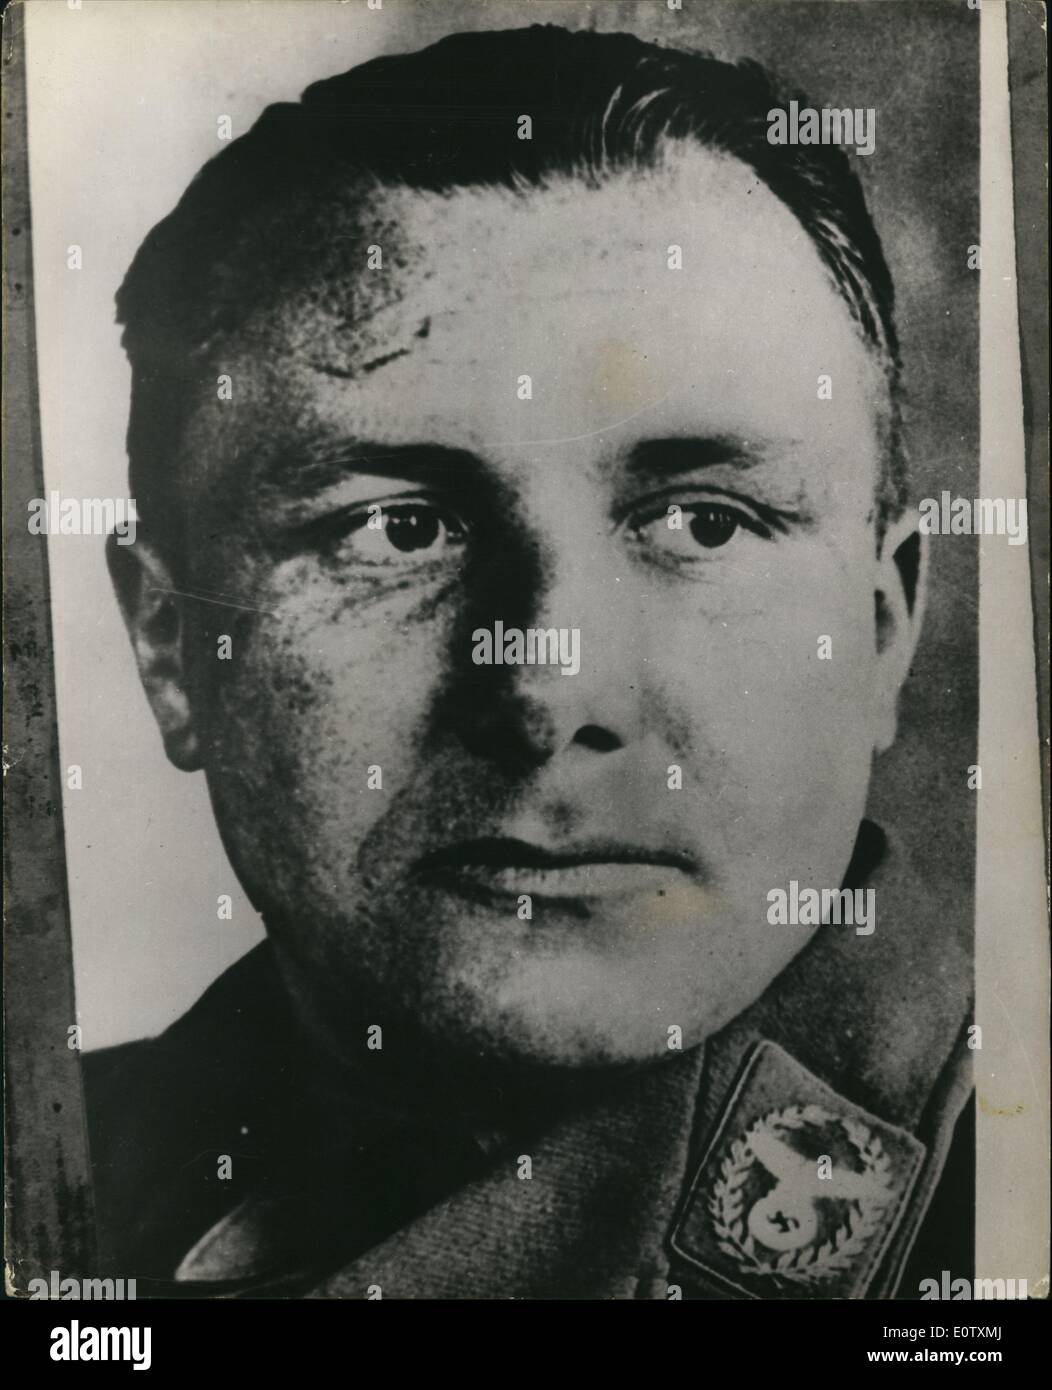 Sep. 09, 1960 - Martin Bormann Reported Held. Arrest In The Argentine: A man - arrested in the Argentine under the name of Walter Flegel - may be Martin Bormann - Hitler's deputy - according to a disclosure by the Minister of the Interior Dr. Alfredo Vito. The man is said to have most of the physical characteristics of the missing Nazi, although he only appeared to be about 48 years of age - and Bormann - if alive - would be 0. The arrested man has only one arm - but Bormann could have lose an arm in escapi from Berlin - or later. (NB Stock Photo